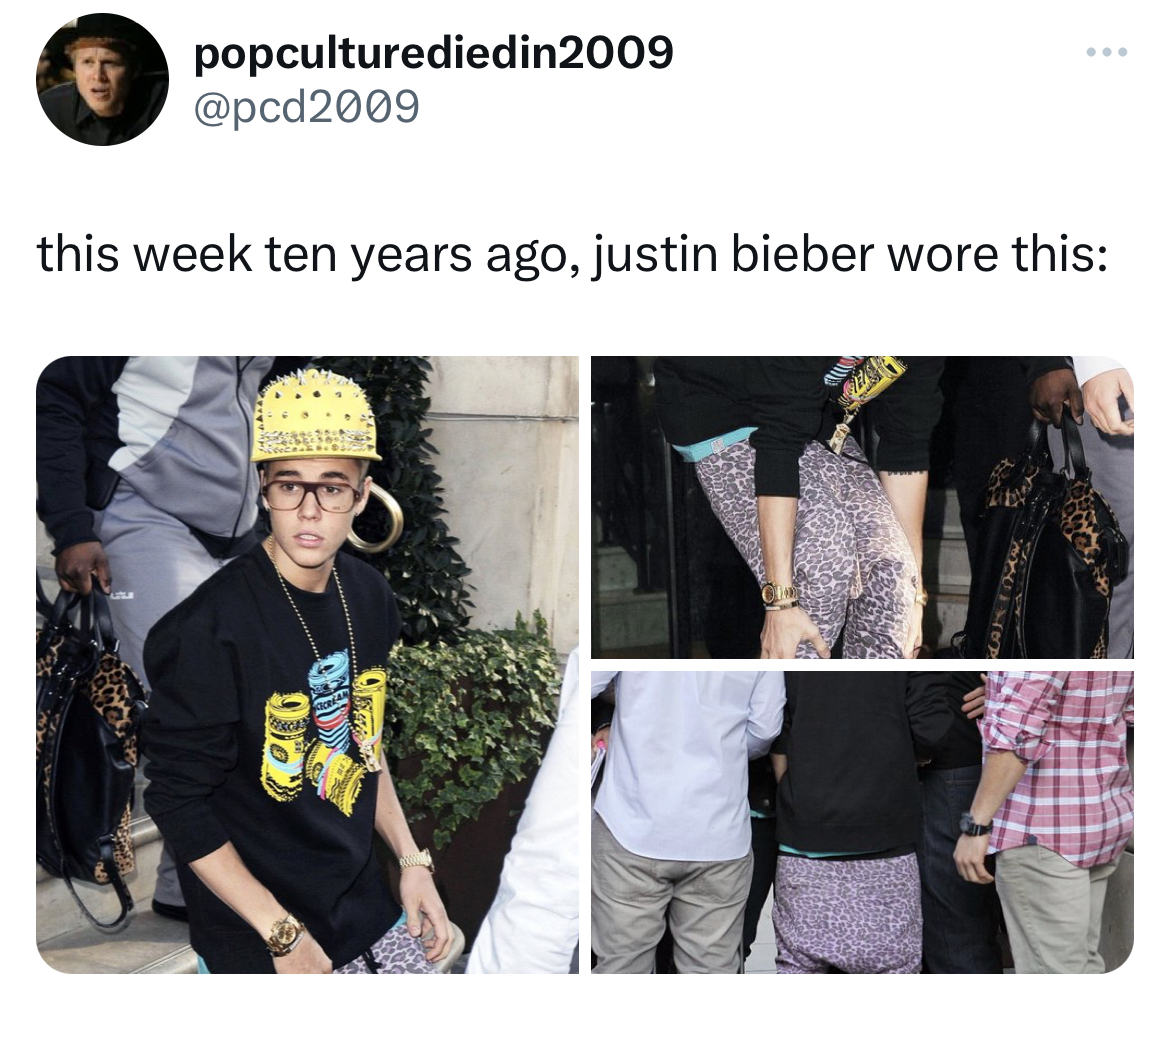 tweets roasting celebs - fashion accessory - popculturediedin2009 this week ten years ago, justin bieber wore this 30 90 Chick Feh Cope